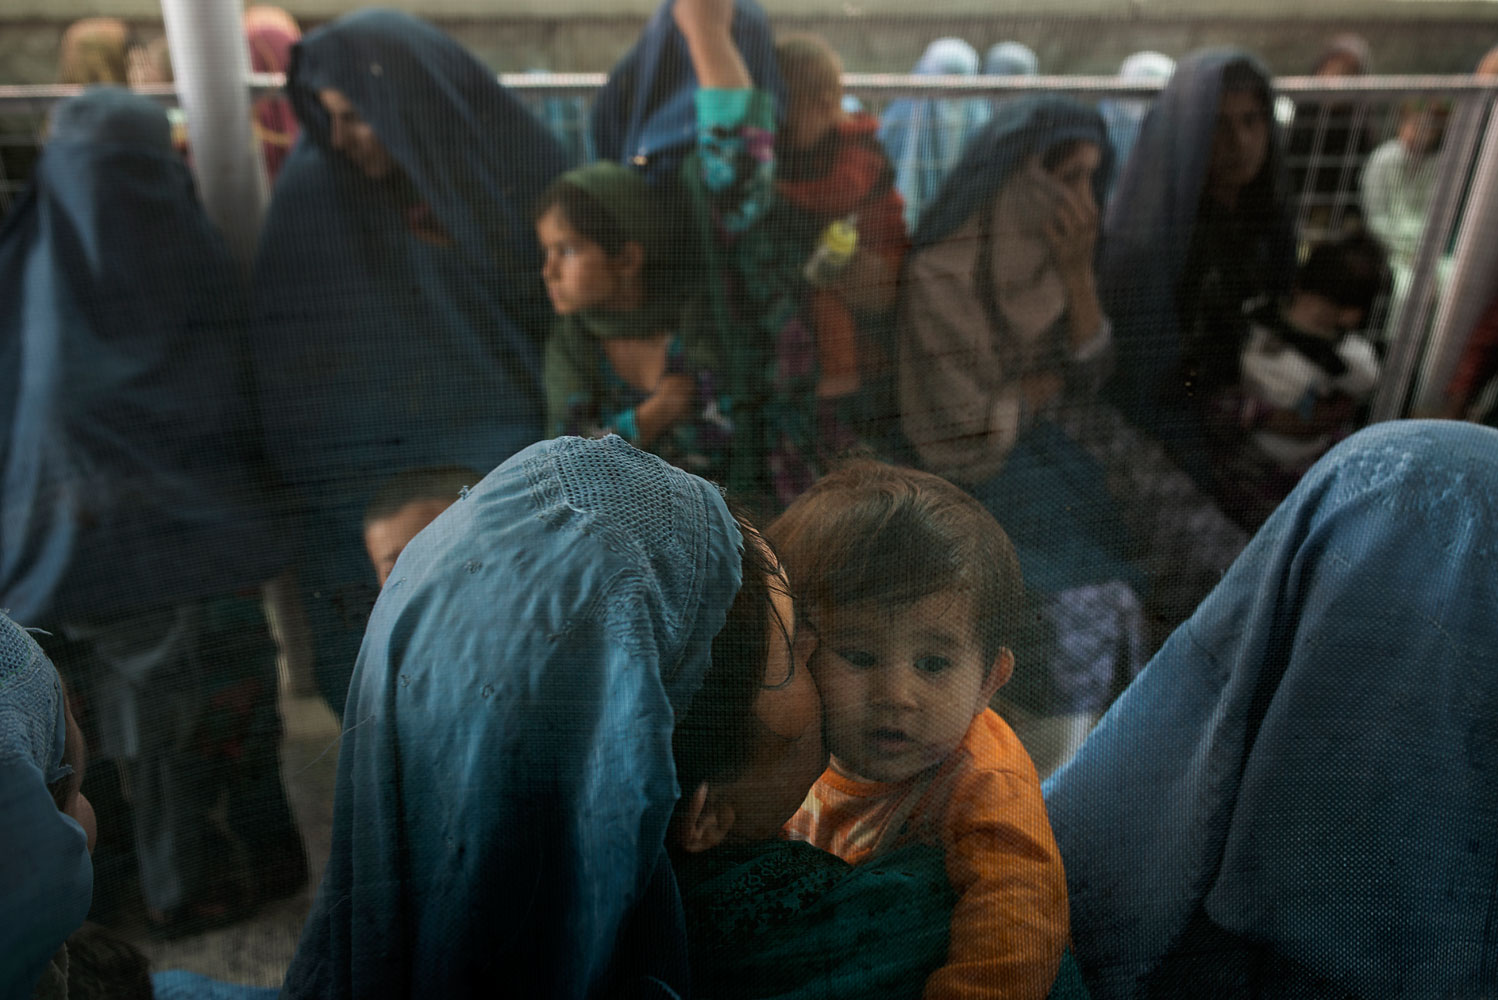 Women wait for services at the Ahmed Shah Baba Hospital in Kabul. Over 600 patients come through the hospital a day.